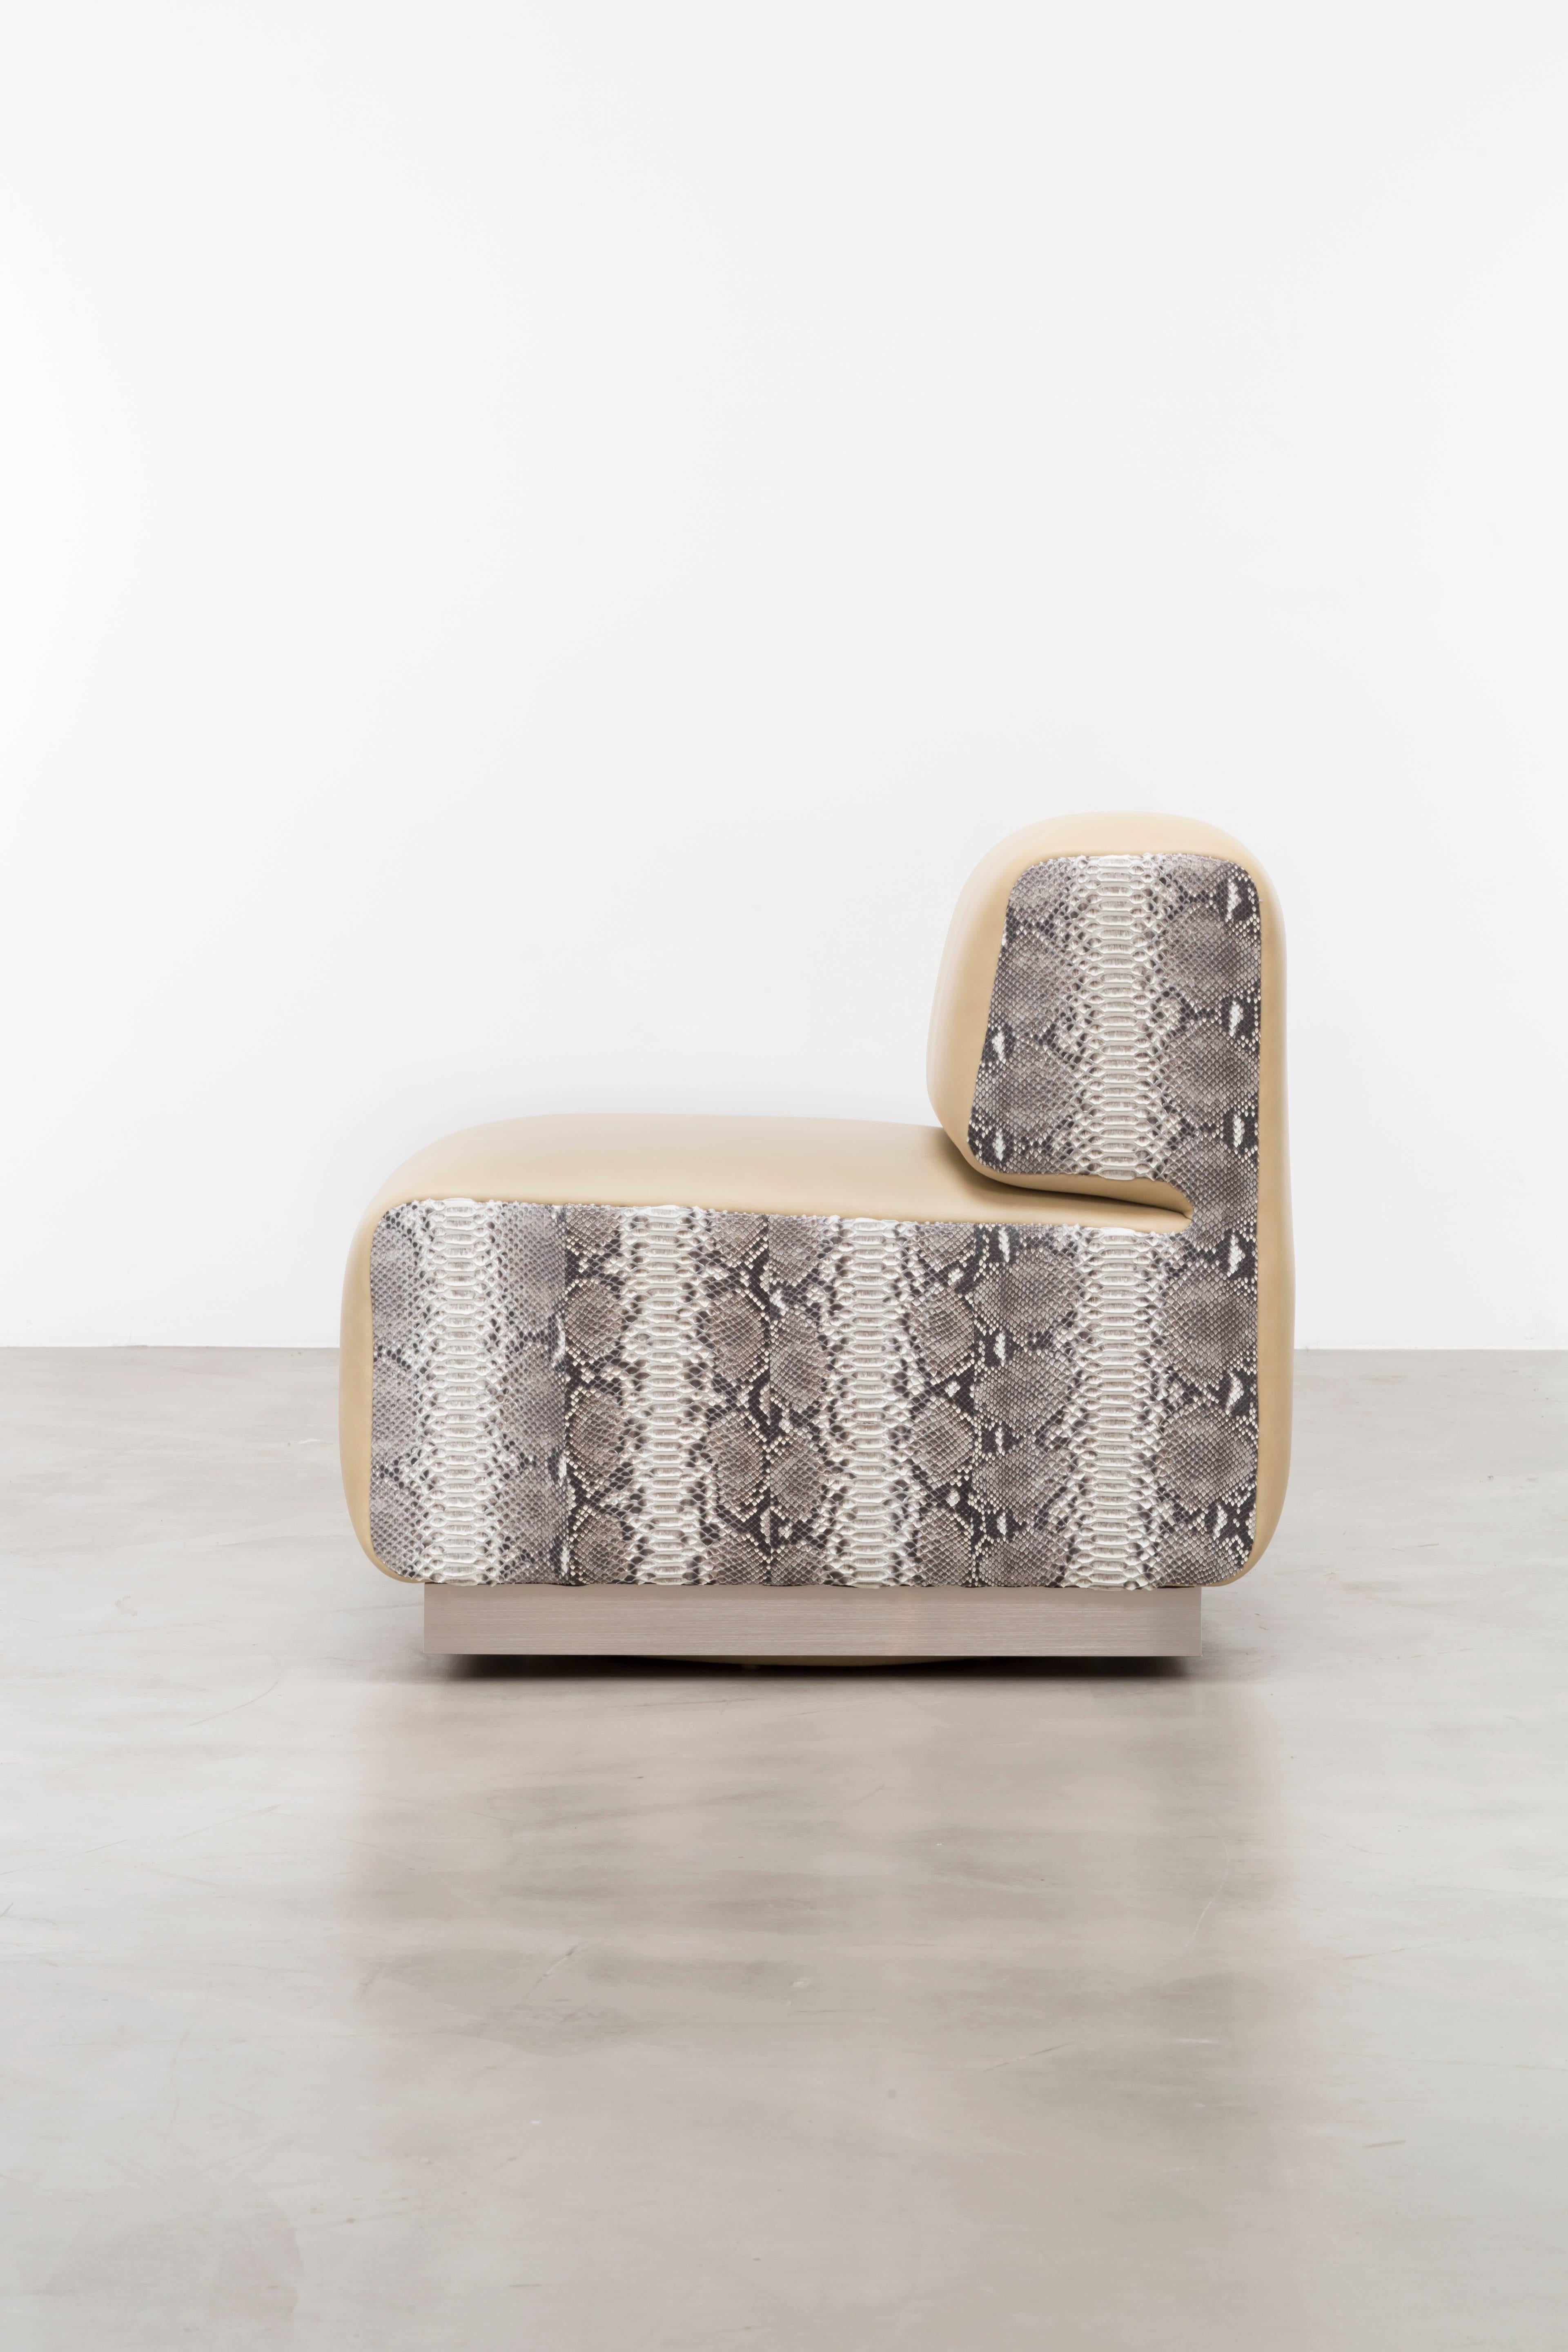 The Leger Chair is a piece of furniture that draws inspiration from the vintage python skin handbags of the 1970s, creating a unique and luxurious seating option. This chair is proudly made in the USA and offers extensive customization to meet your